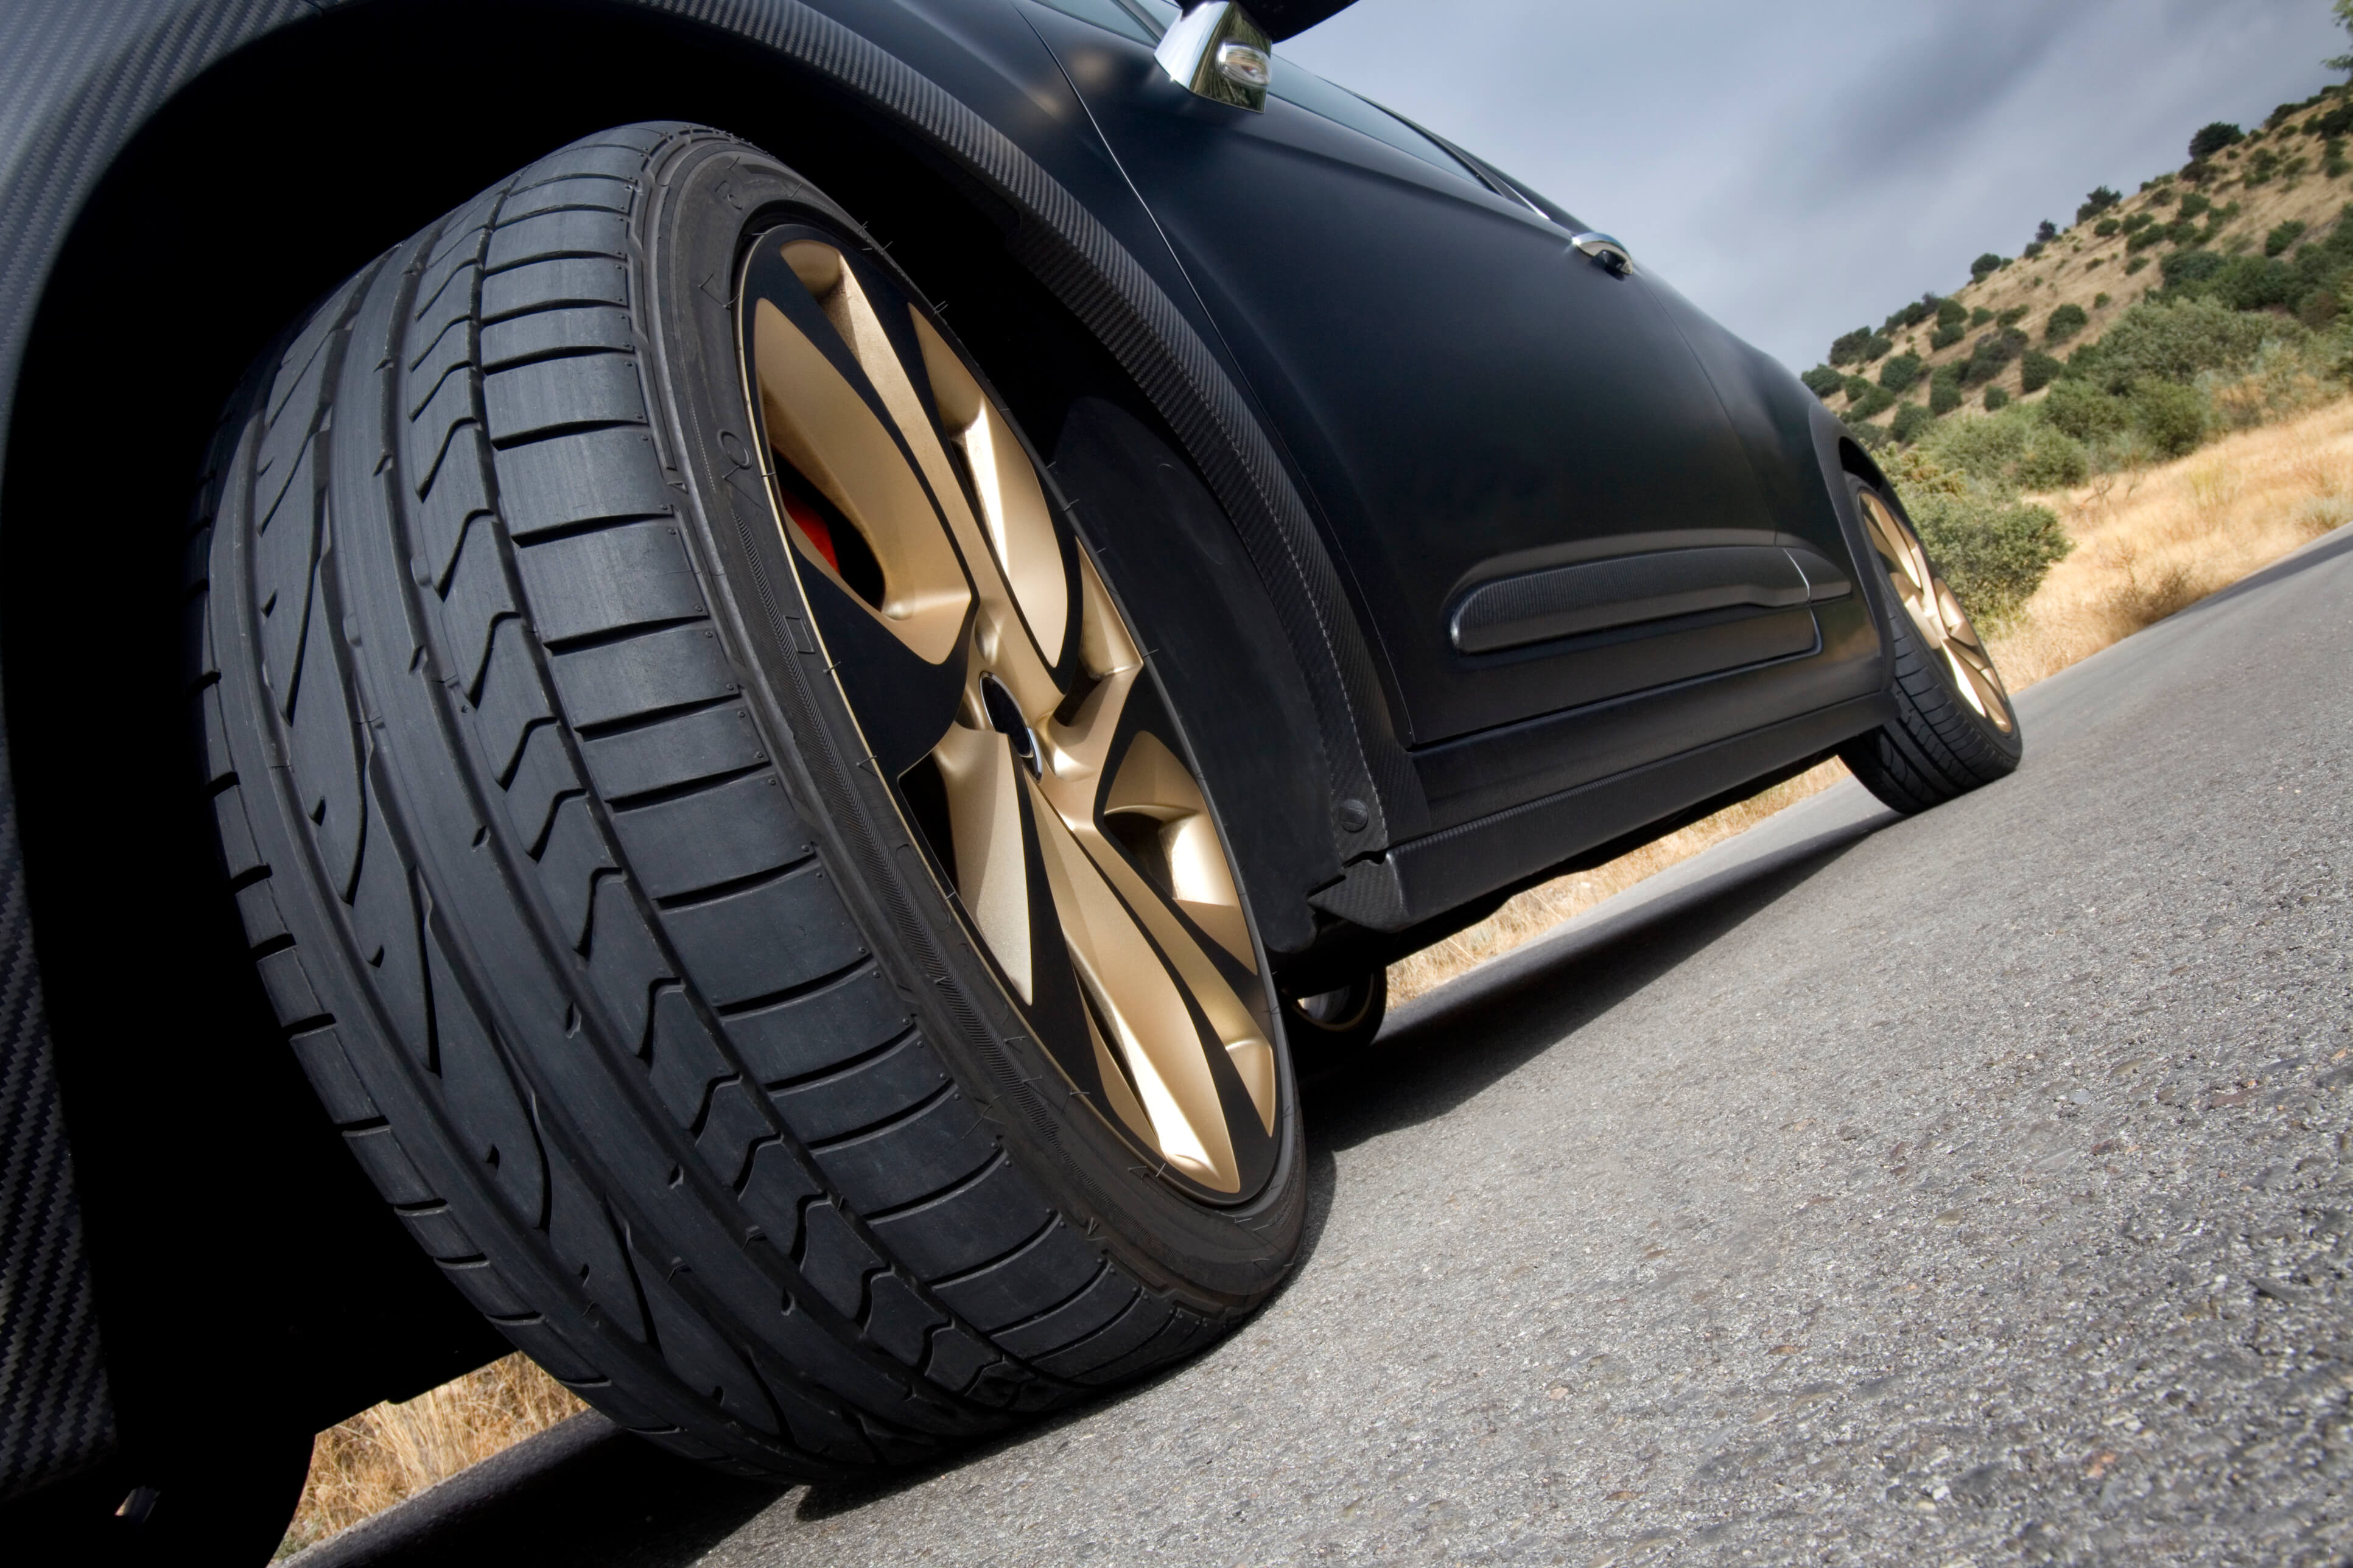 Tread depth bars can be seen in your tyres center grooves. A minimum of 1.5mm is the legal requirement in Australia.